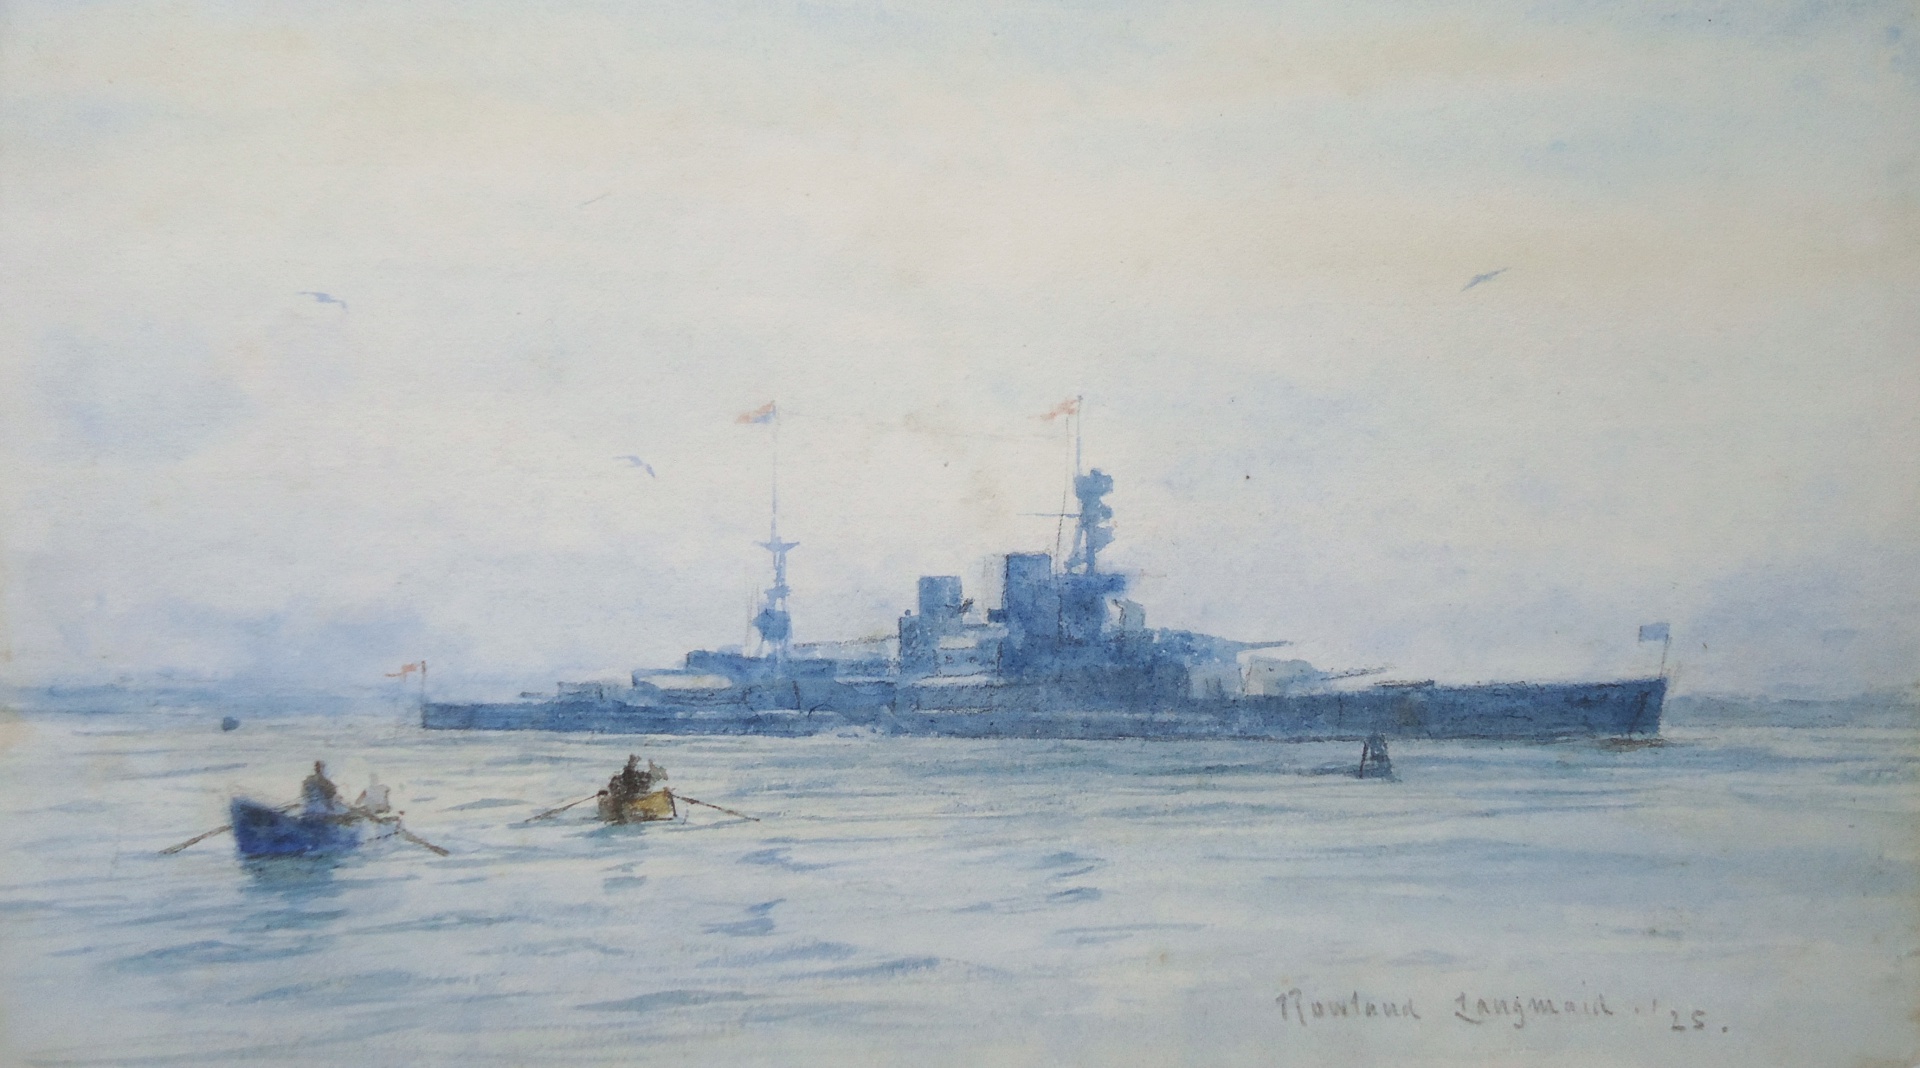 HMS REPULSE wearing the Standard of HRH The Prince of Wales, 1925